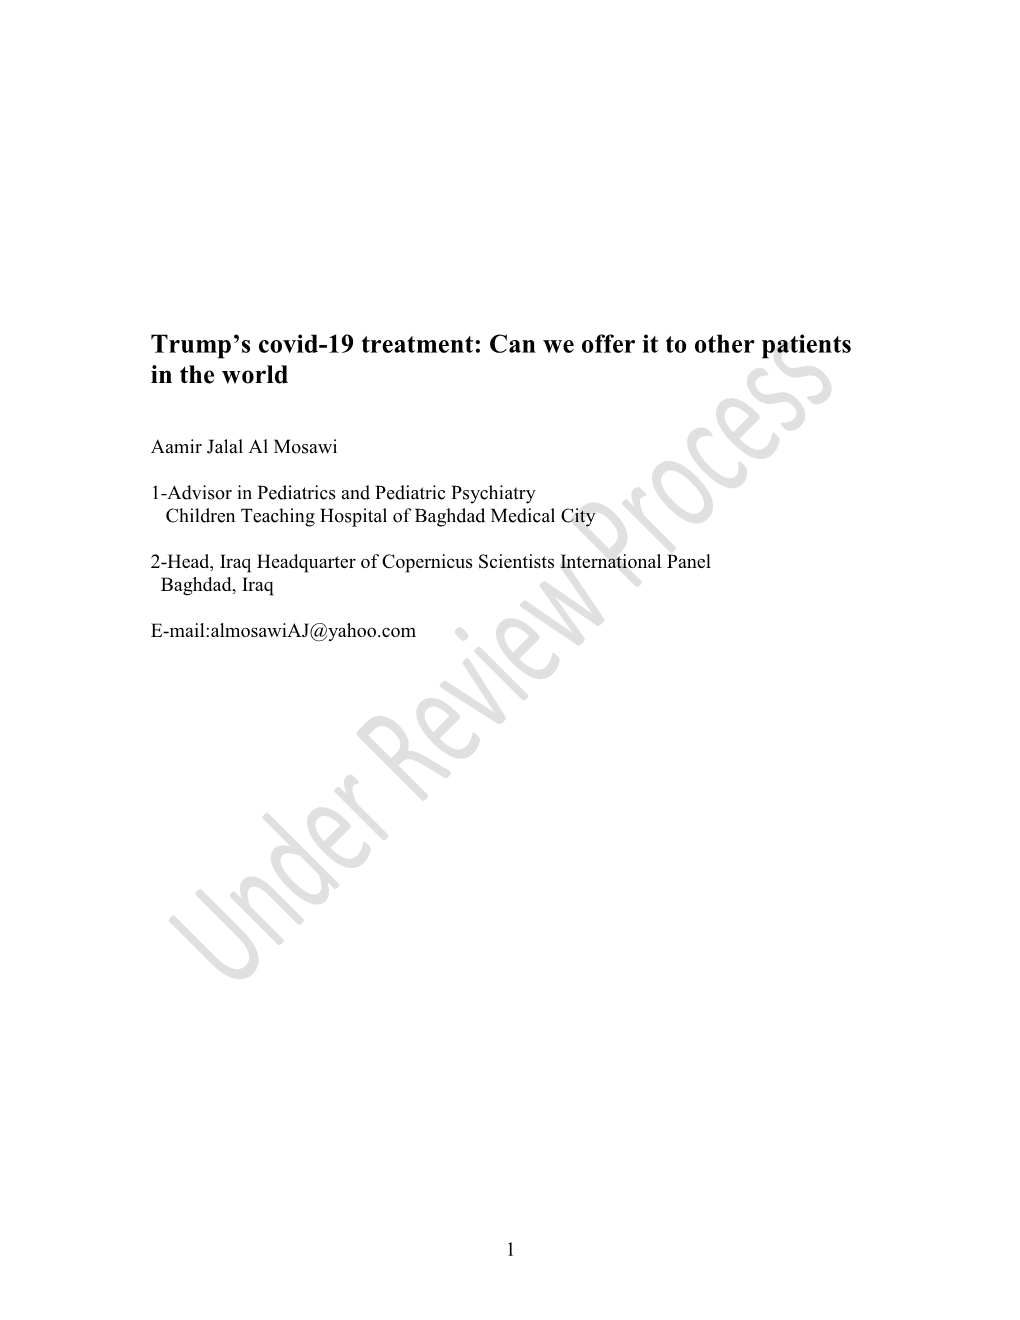 Trump's Covid-19 Treatment: Can We Offer It to Other Patients in the World